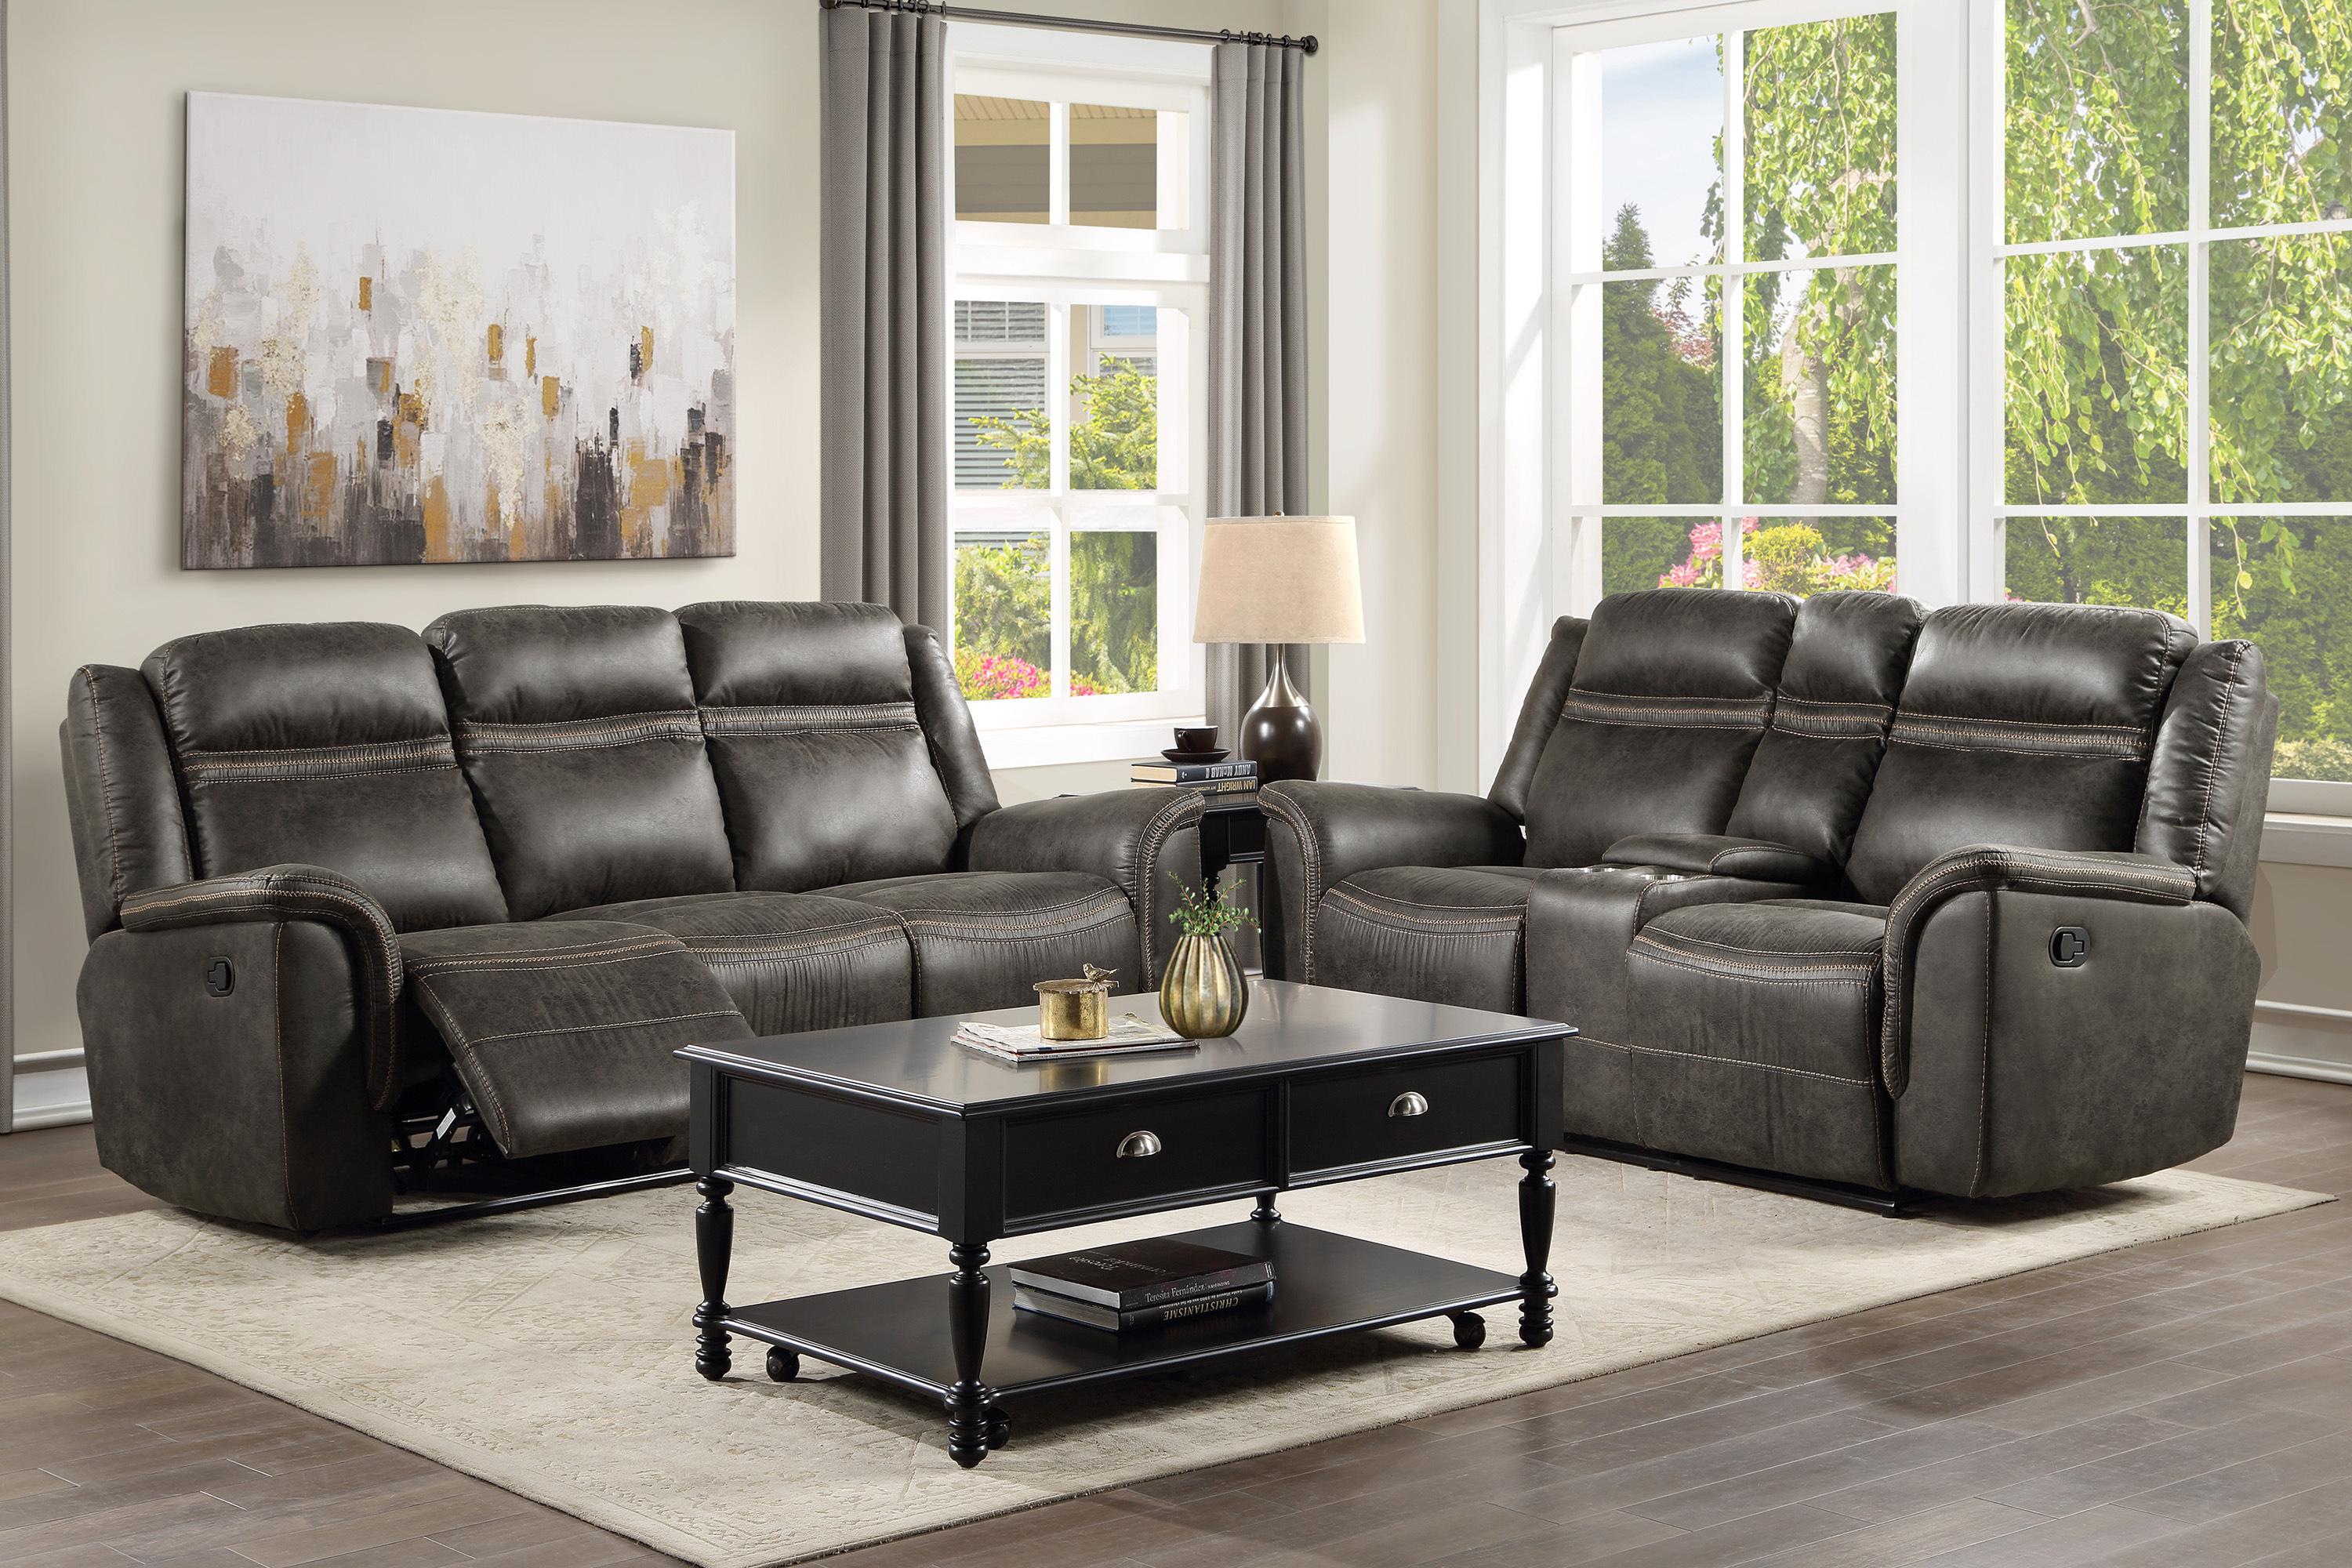 Transitional Reclining Set 9426-2PC Boise 9426-2PC in Brown Microfiber